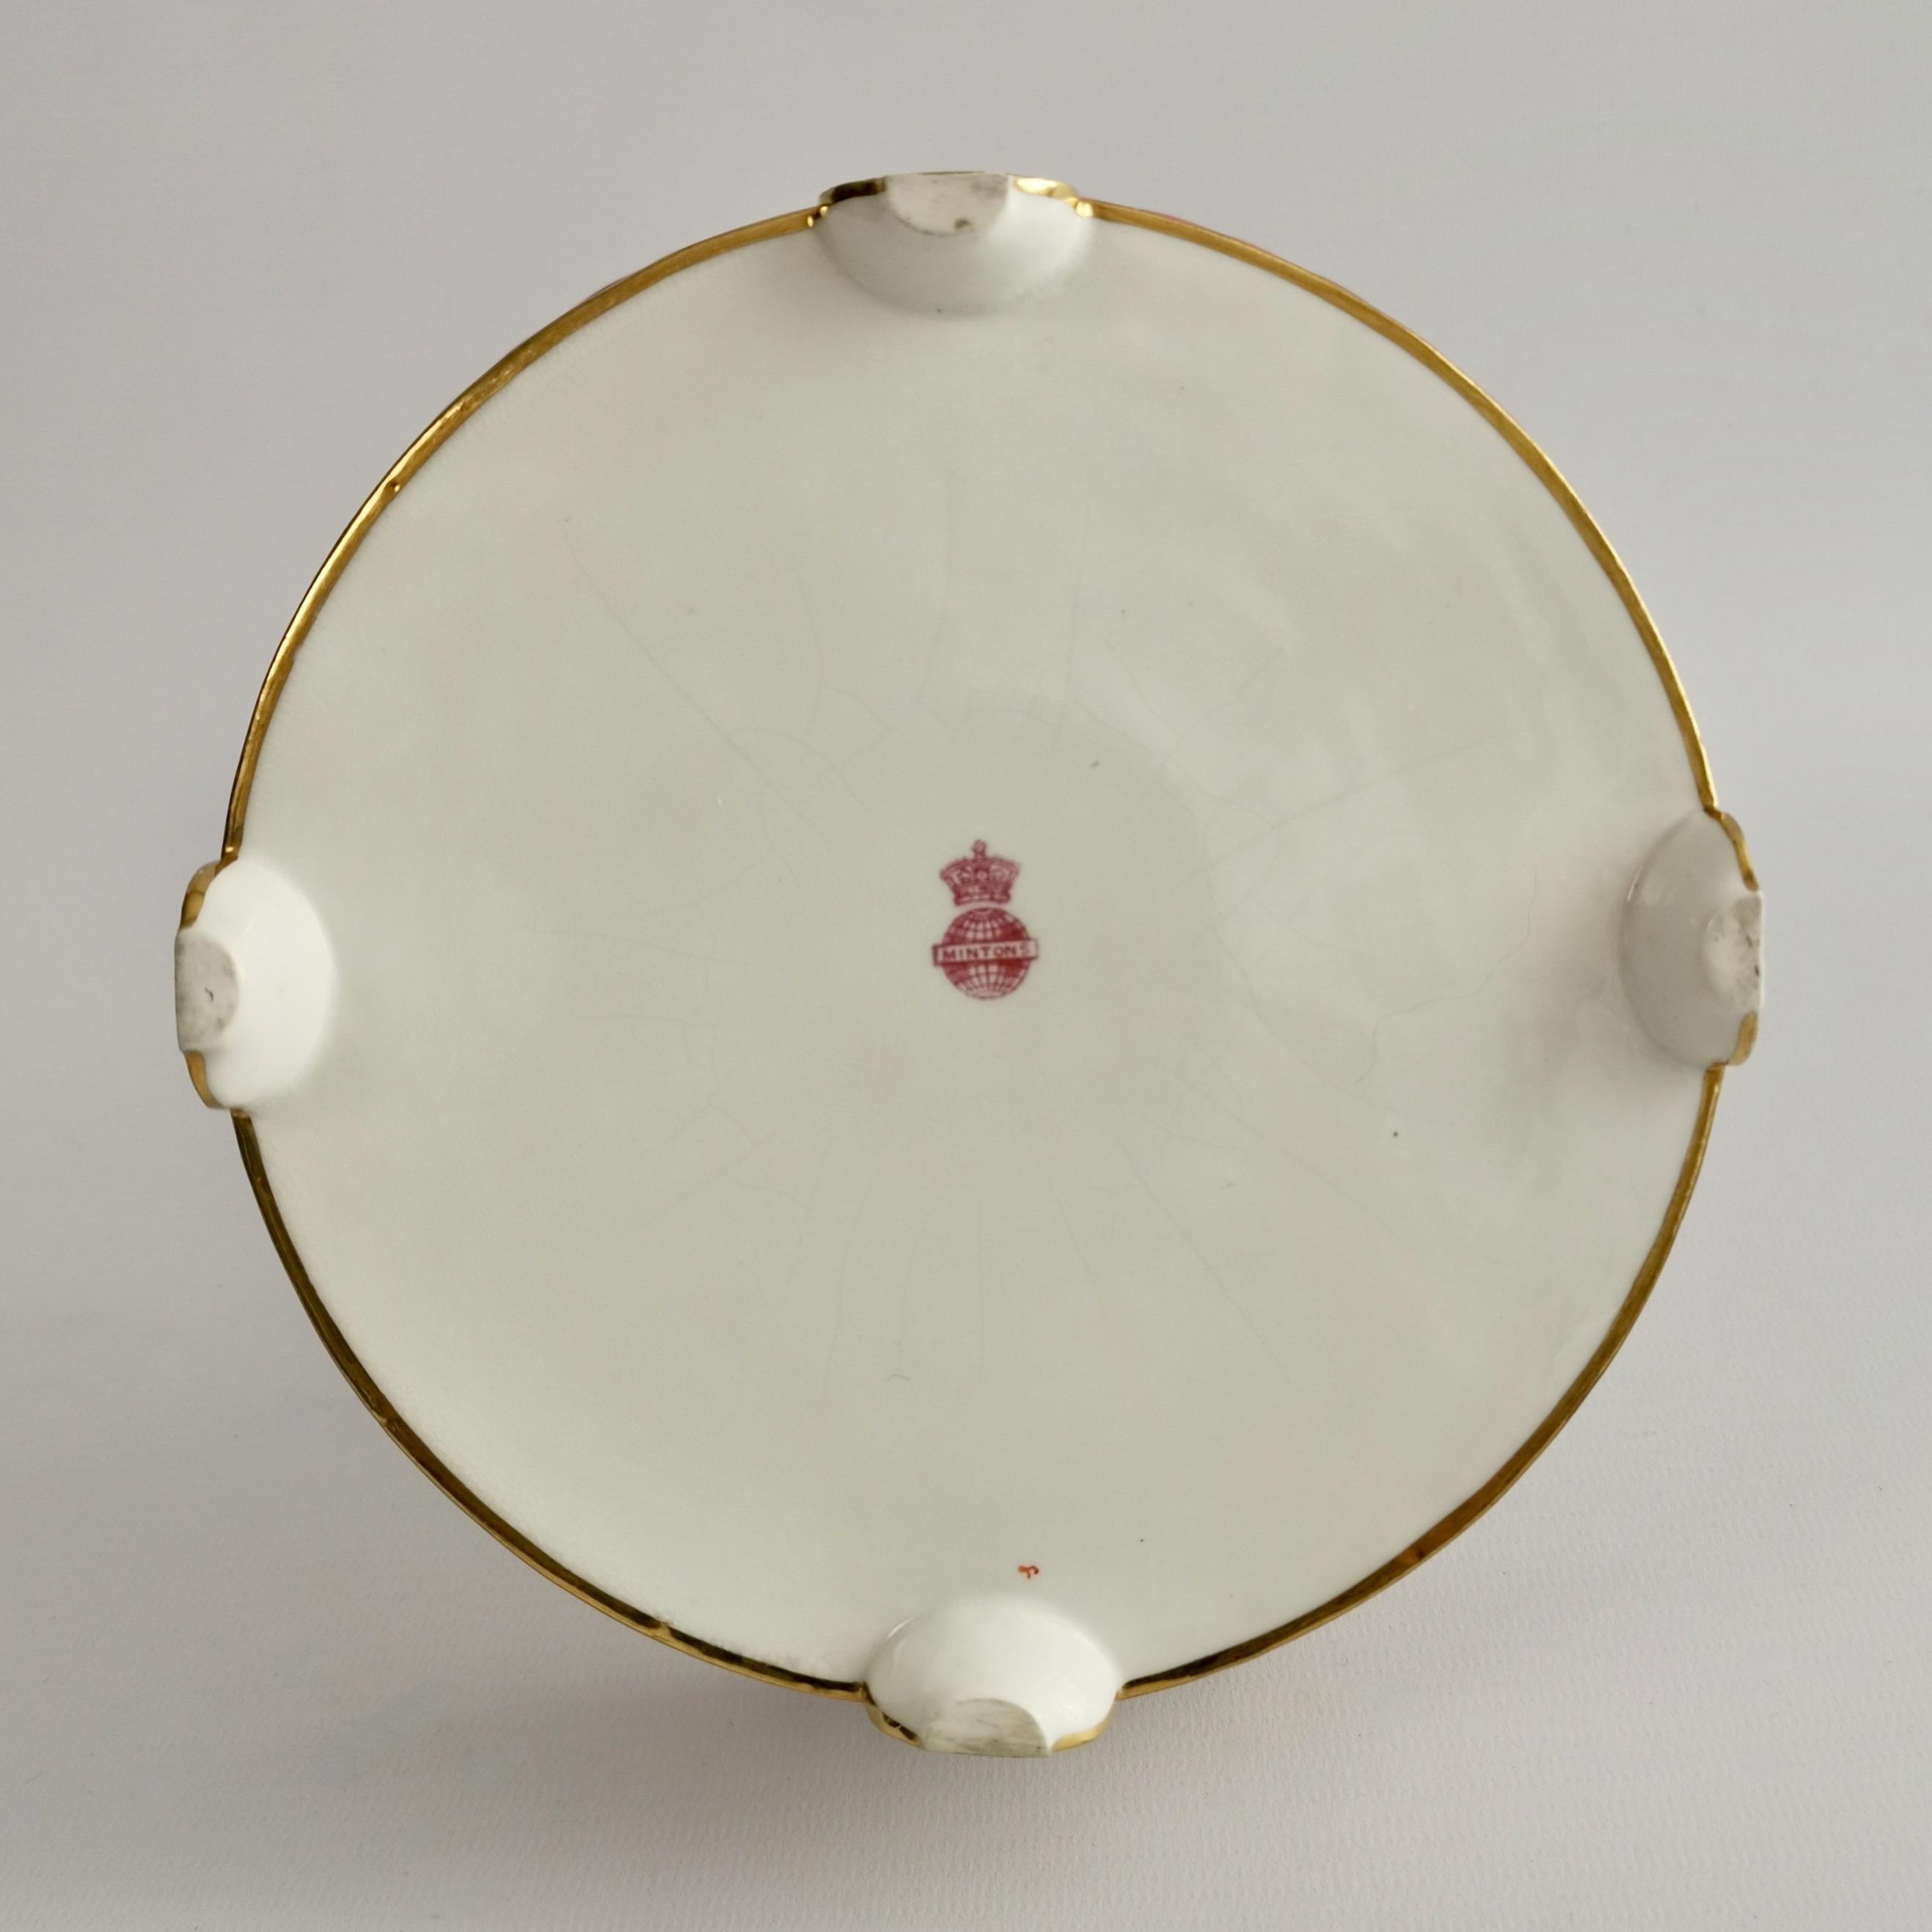 Minton Porcelain Tazza Dish, White and Pink with Cherub, 1891 6